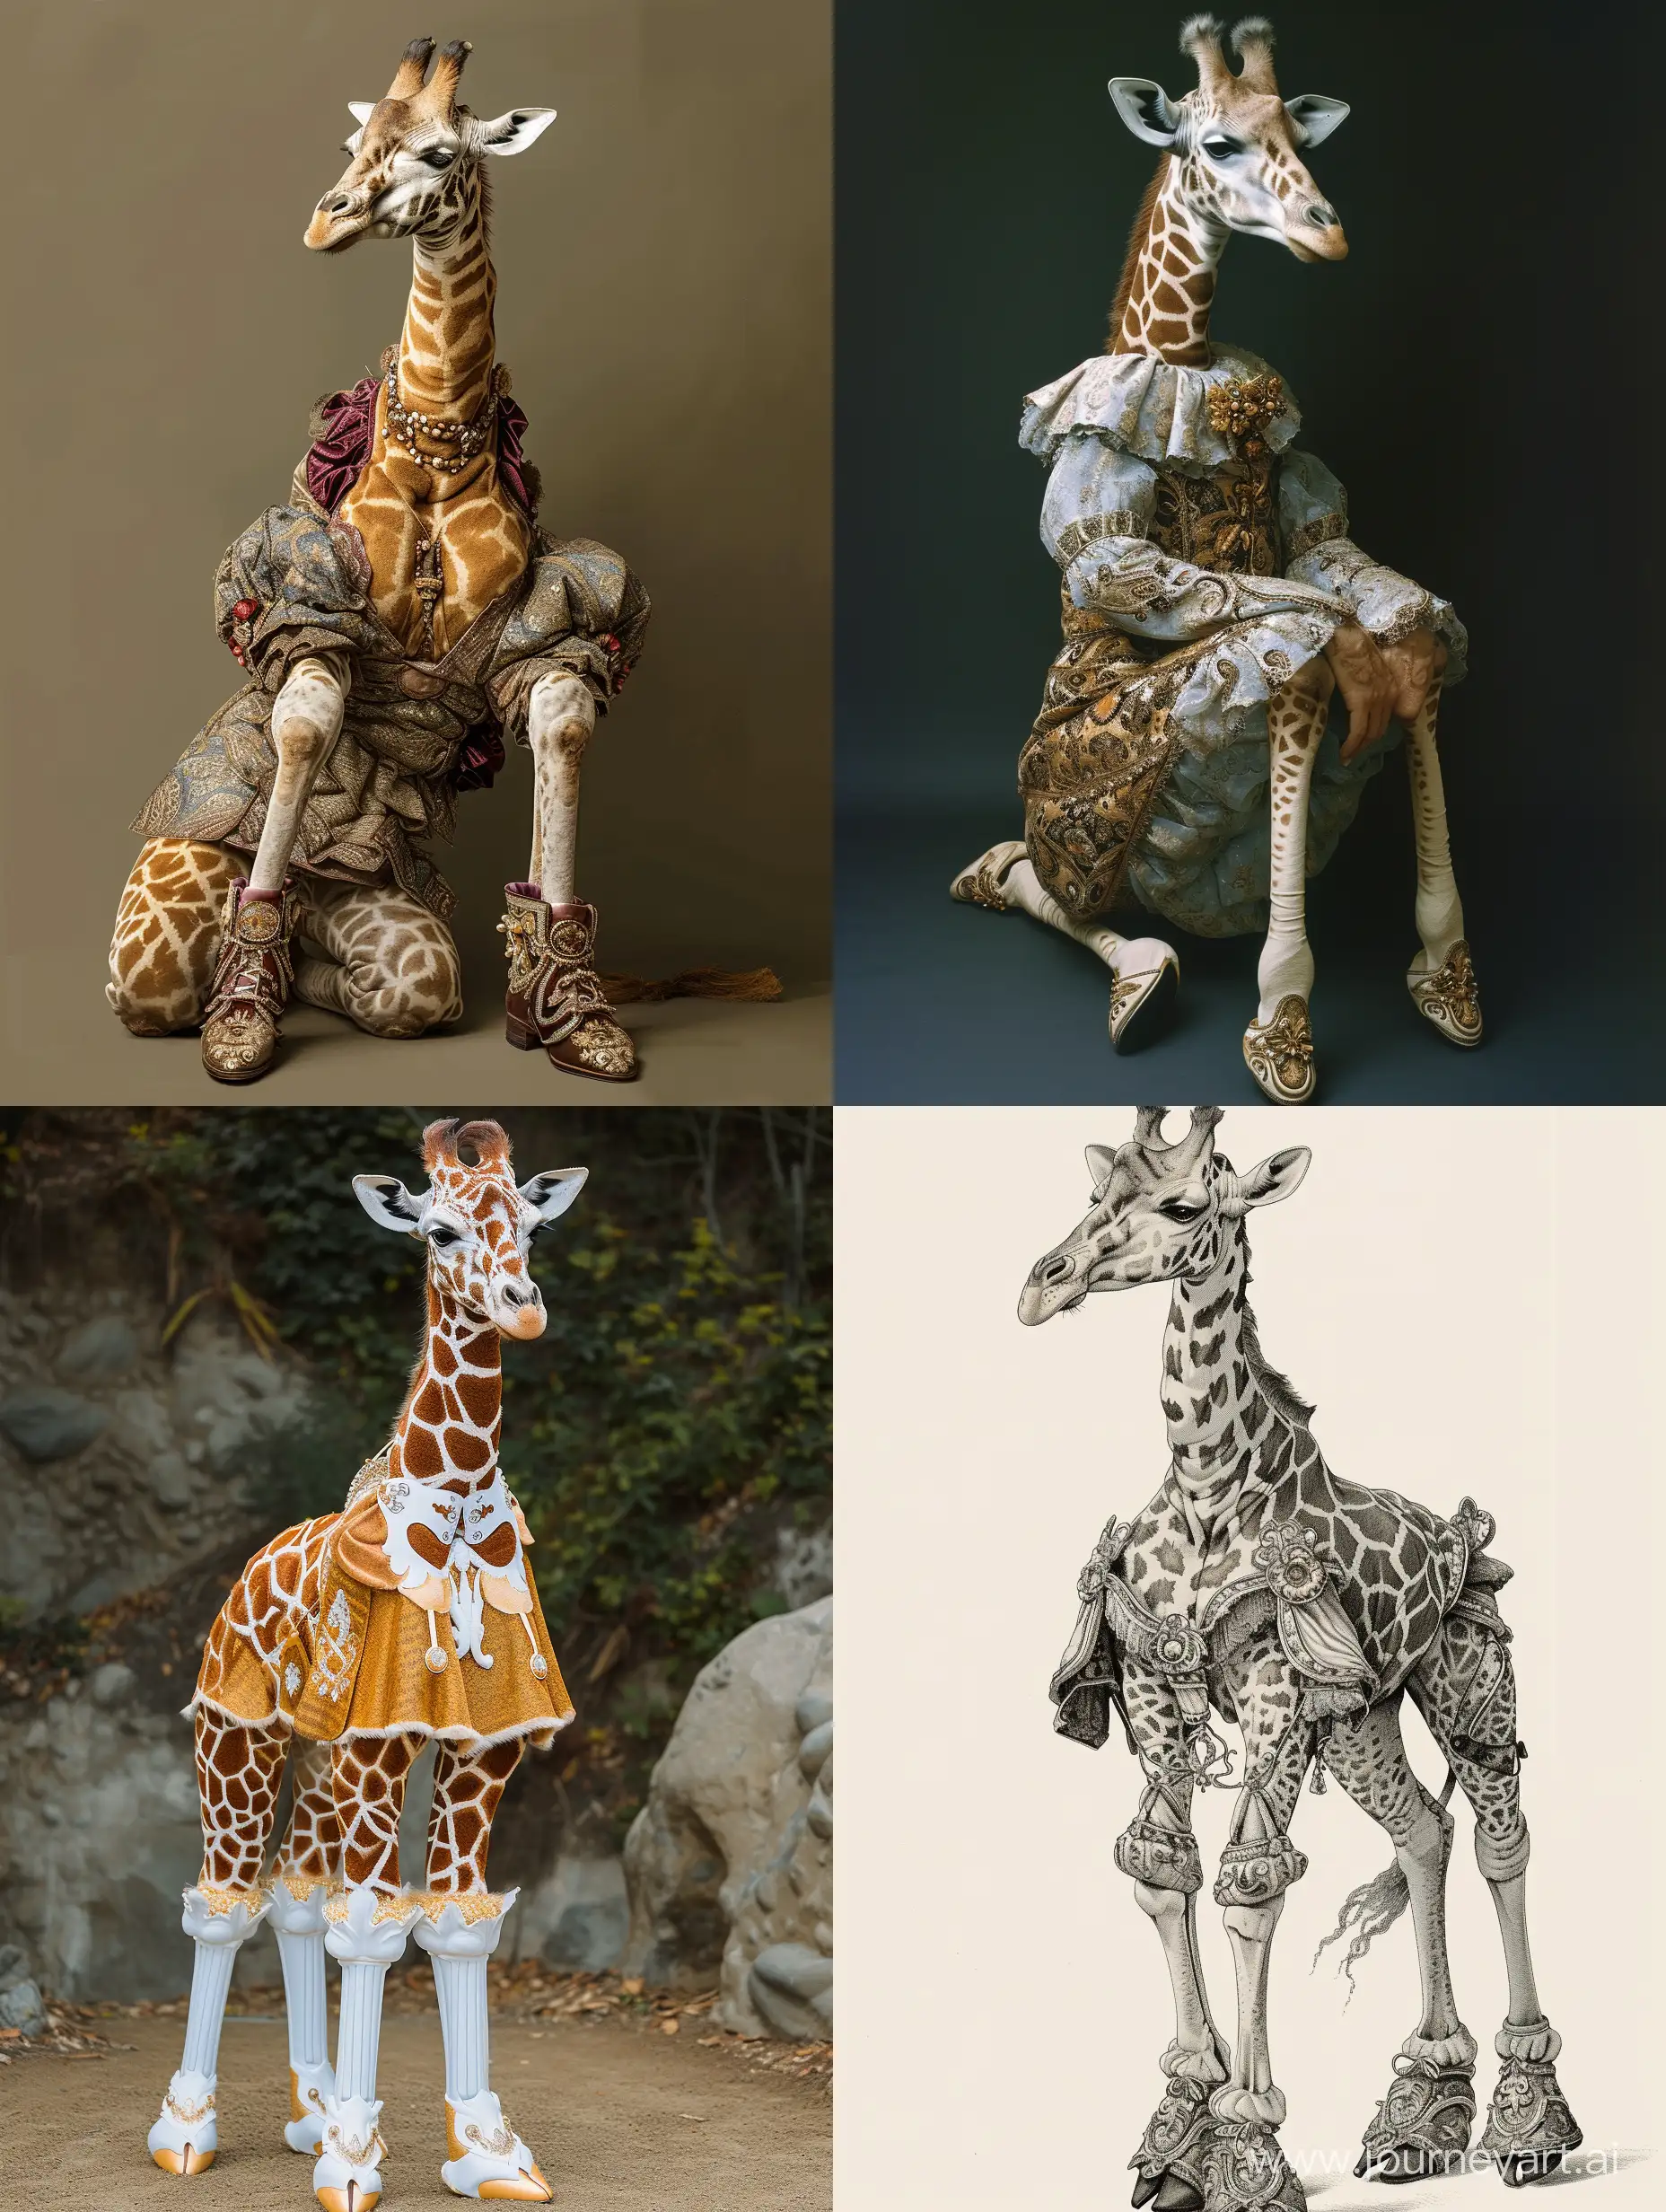 Giraffe-Wearing-Baroquestyle-Costume-and-Shoes-in-Full-Growth